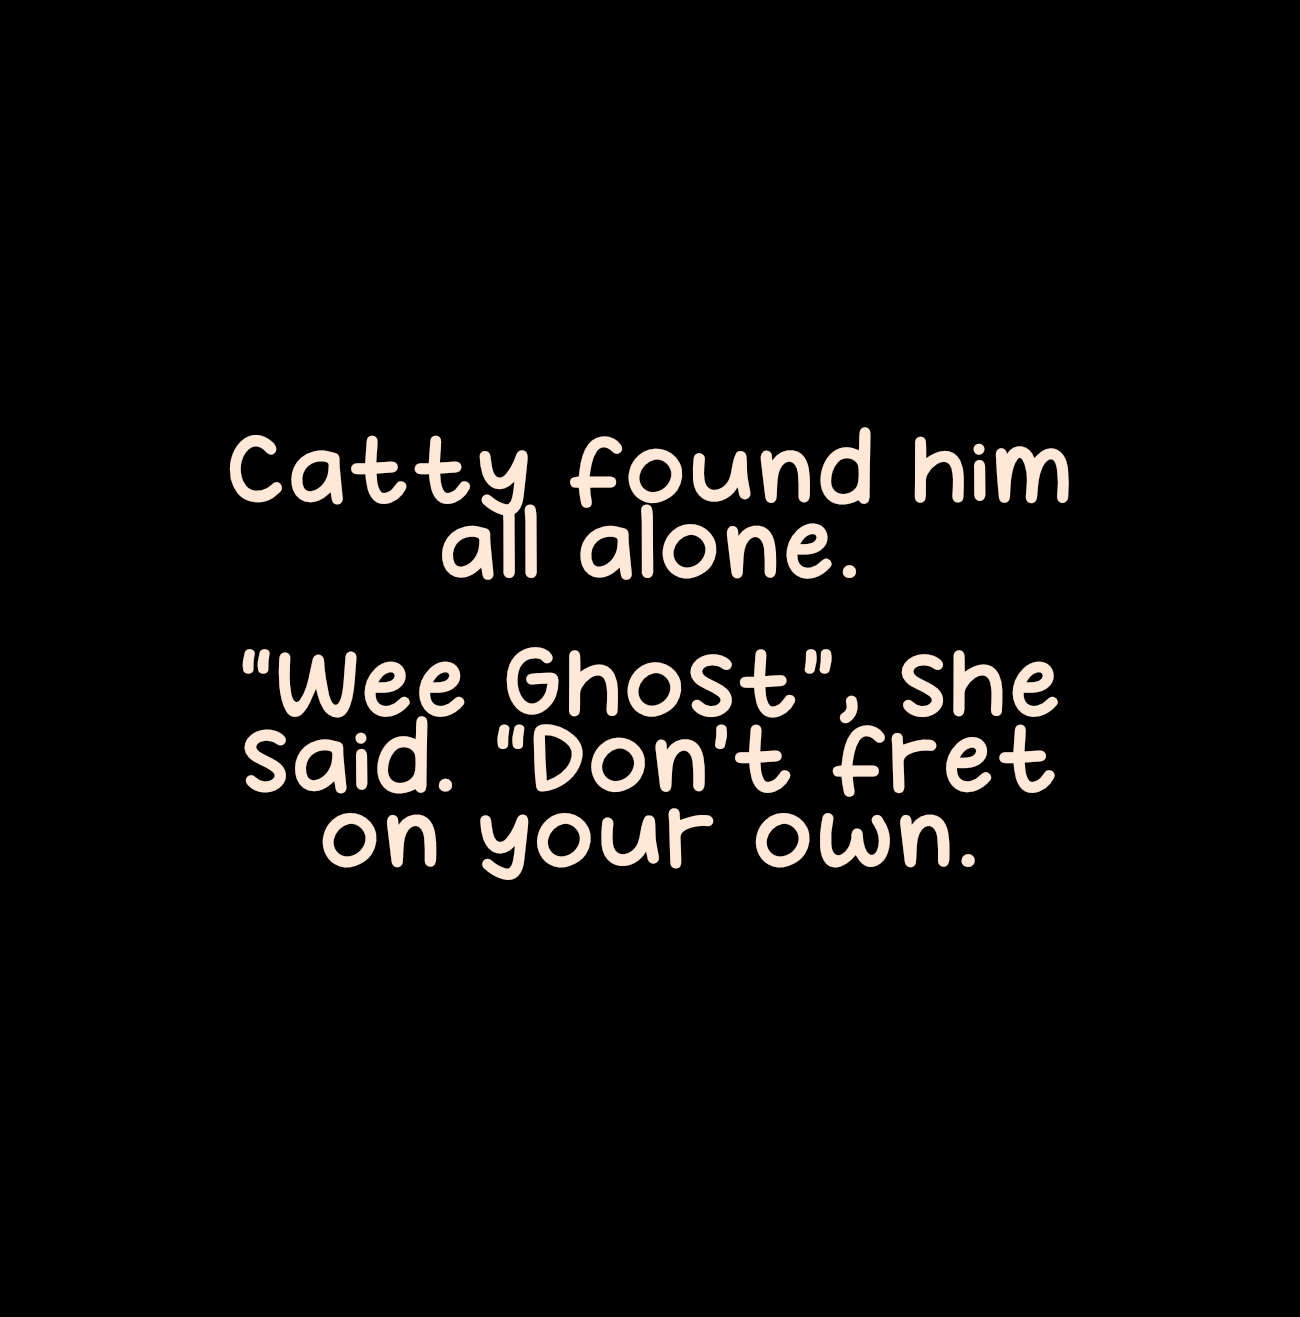 Bedtime-stories-The Friendly Ghost short Halloween stories for kids page 31